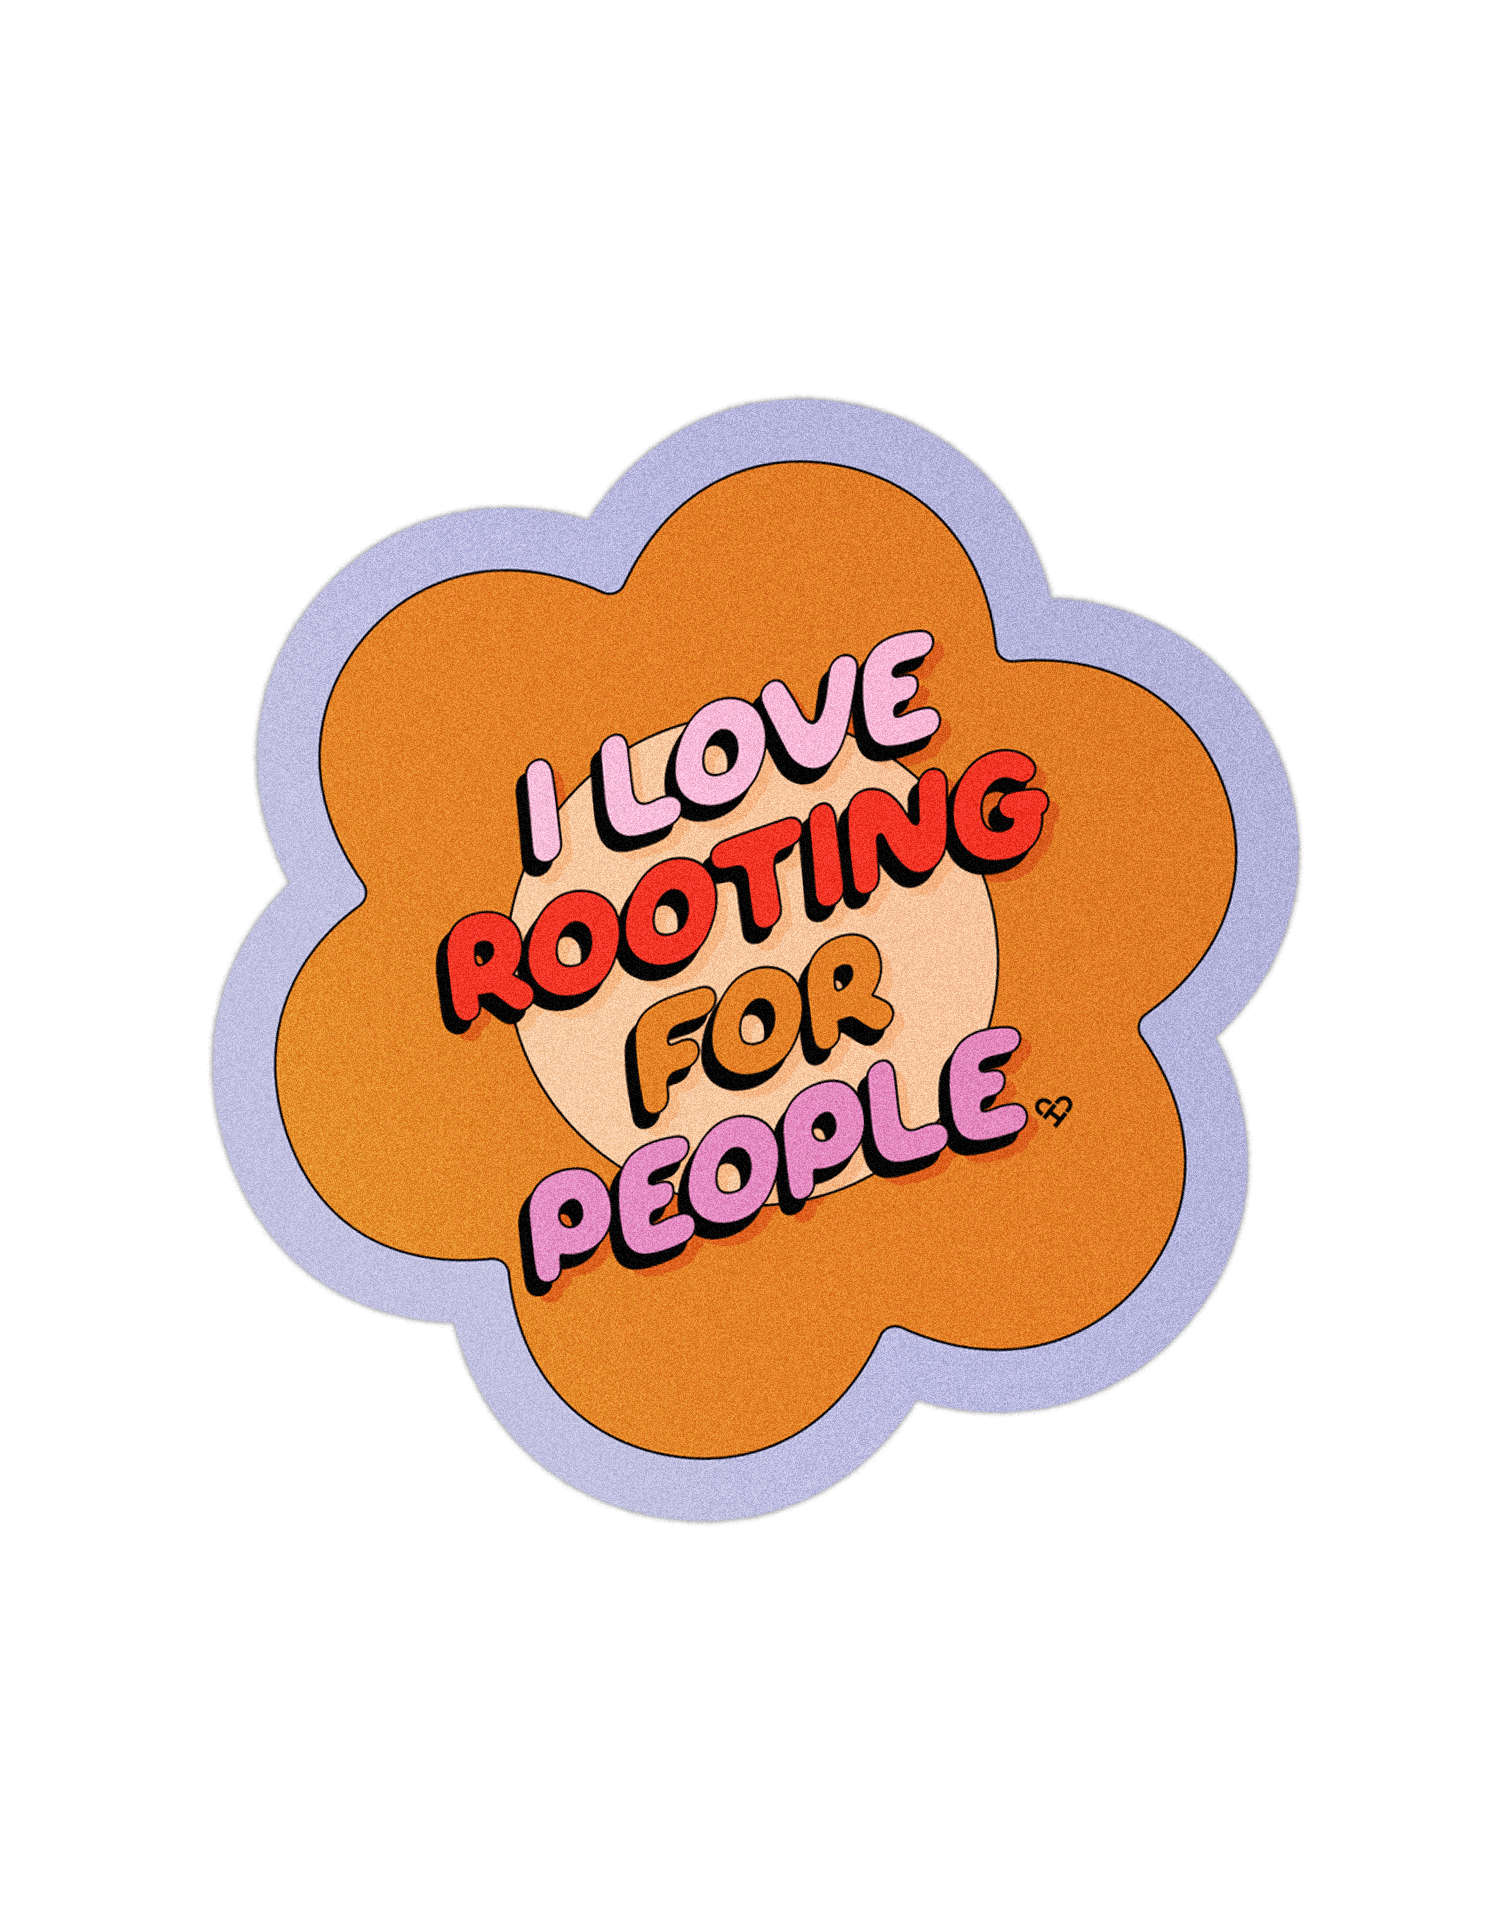 Rooting-for-people.png